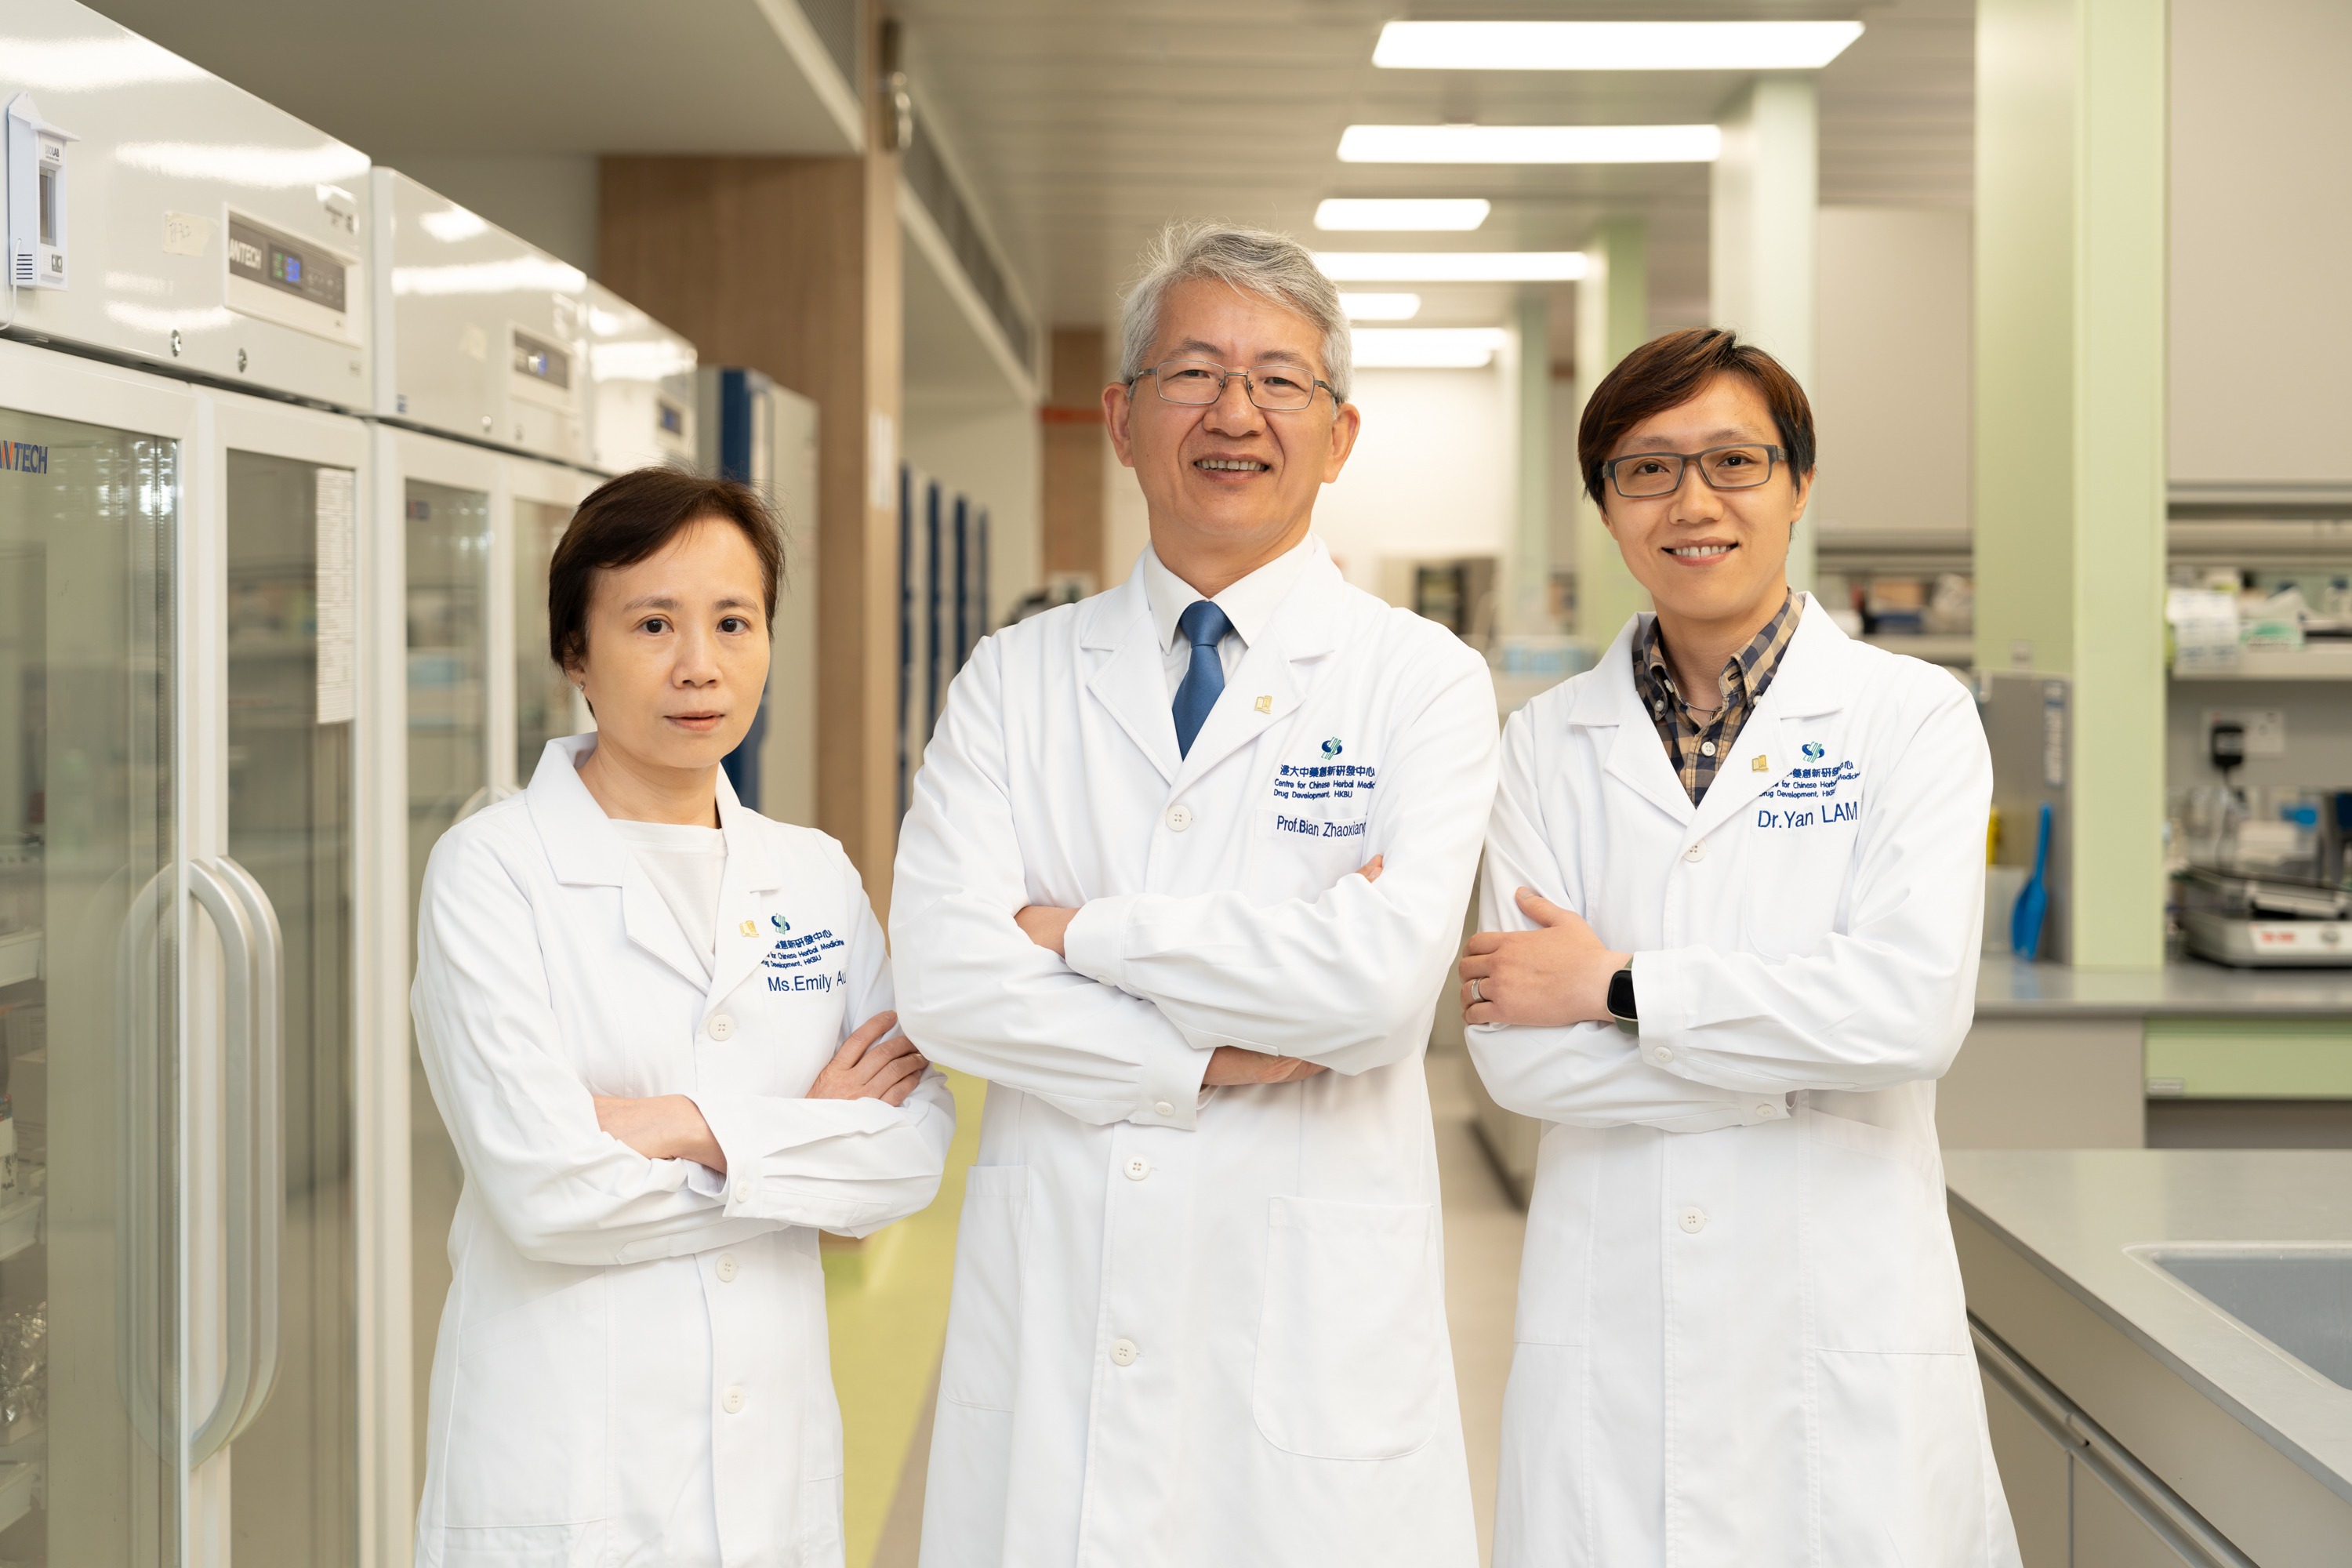 A research team led by Professor Bian Zhaoxiang (middle), Ms Emily Au (left) and Dr Lam Yan-yan (right) develops CDD-2101, a novel Chinese medicine for treating chronic constipation based on the traditional Chinese herbal formulation “MaZiRenWan”.